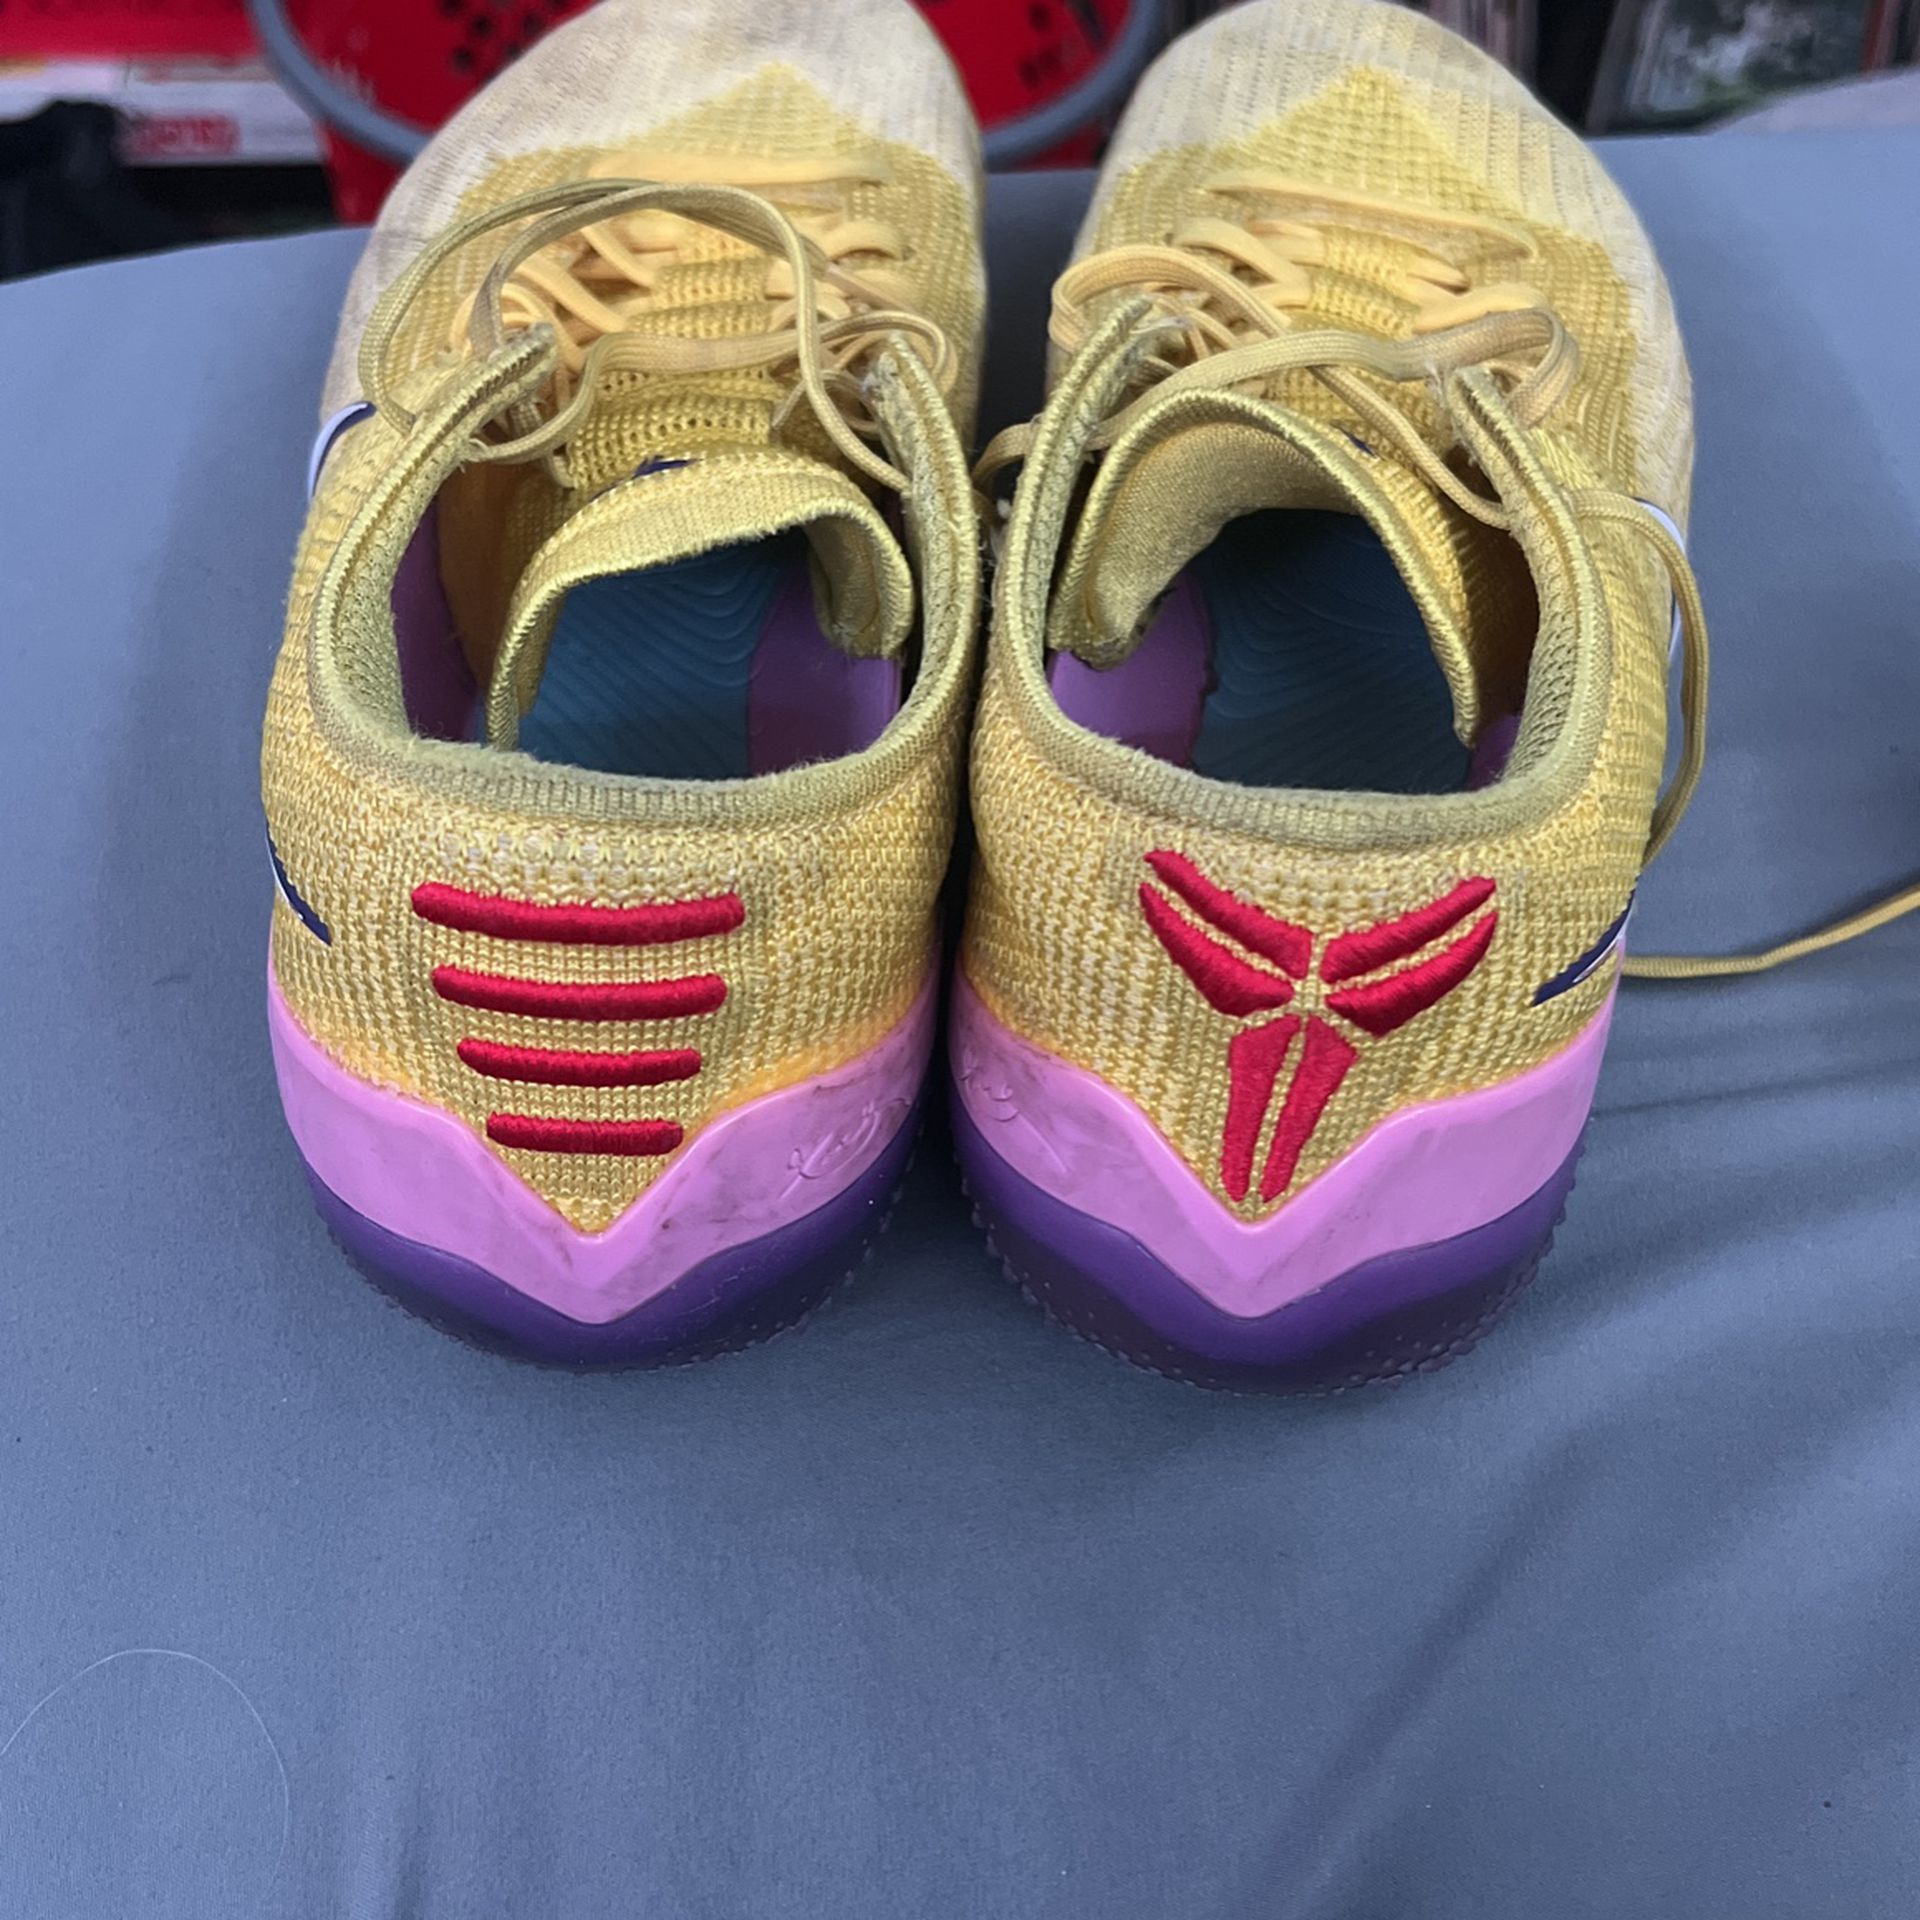 New Nike kobe ad nxt 360 lakers shoes men size 8.5, 9.5 and 12 for Sale in  West Covina, CA - OfferUp